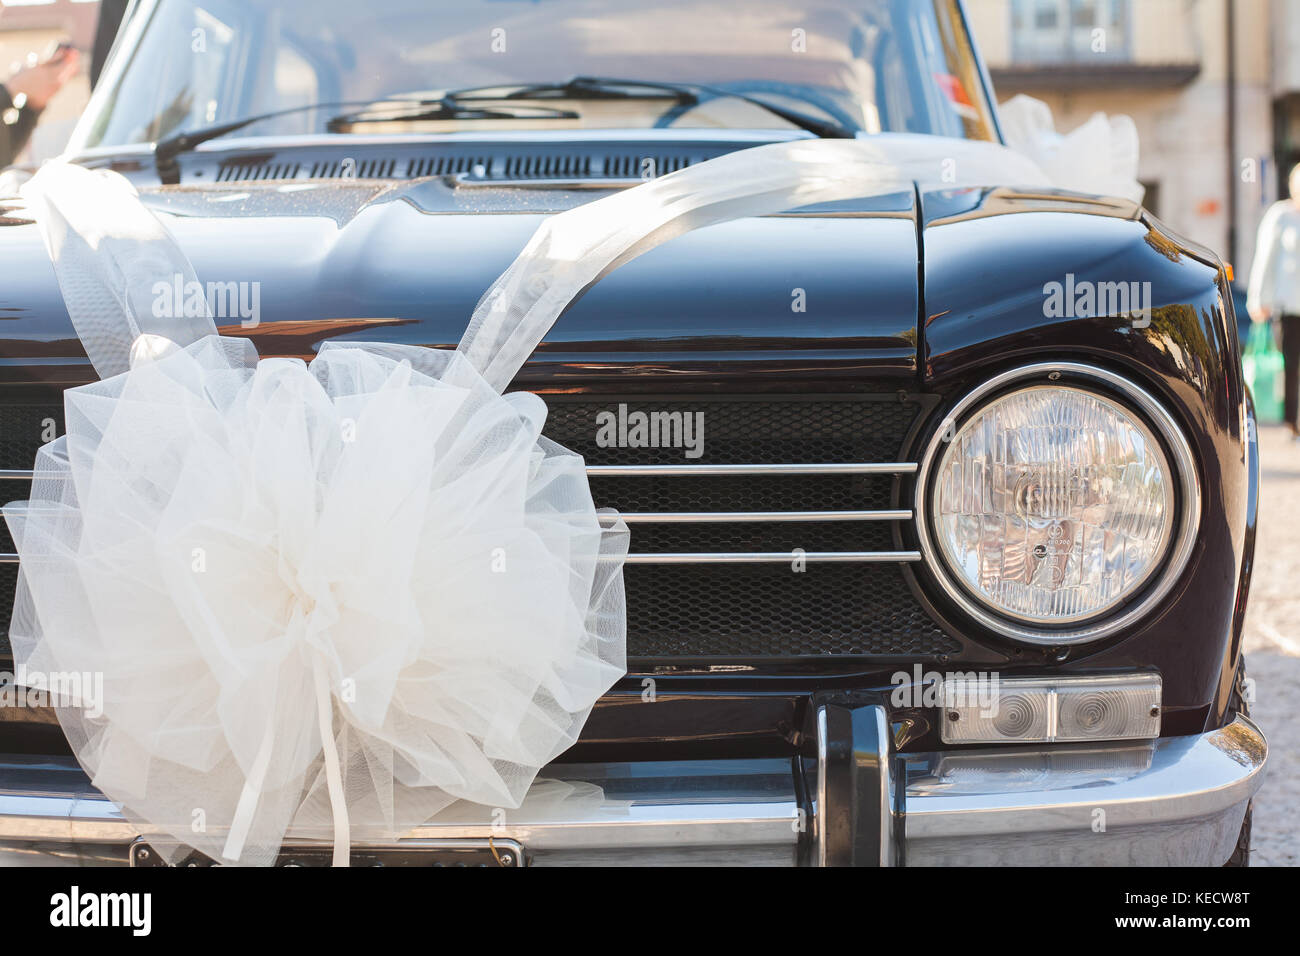 Vintage luxury car ready for wedding day, with clean body and a white ribbon representing the bride's car. Stock Photo